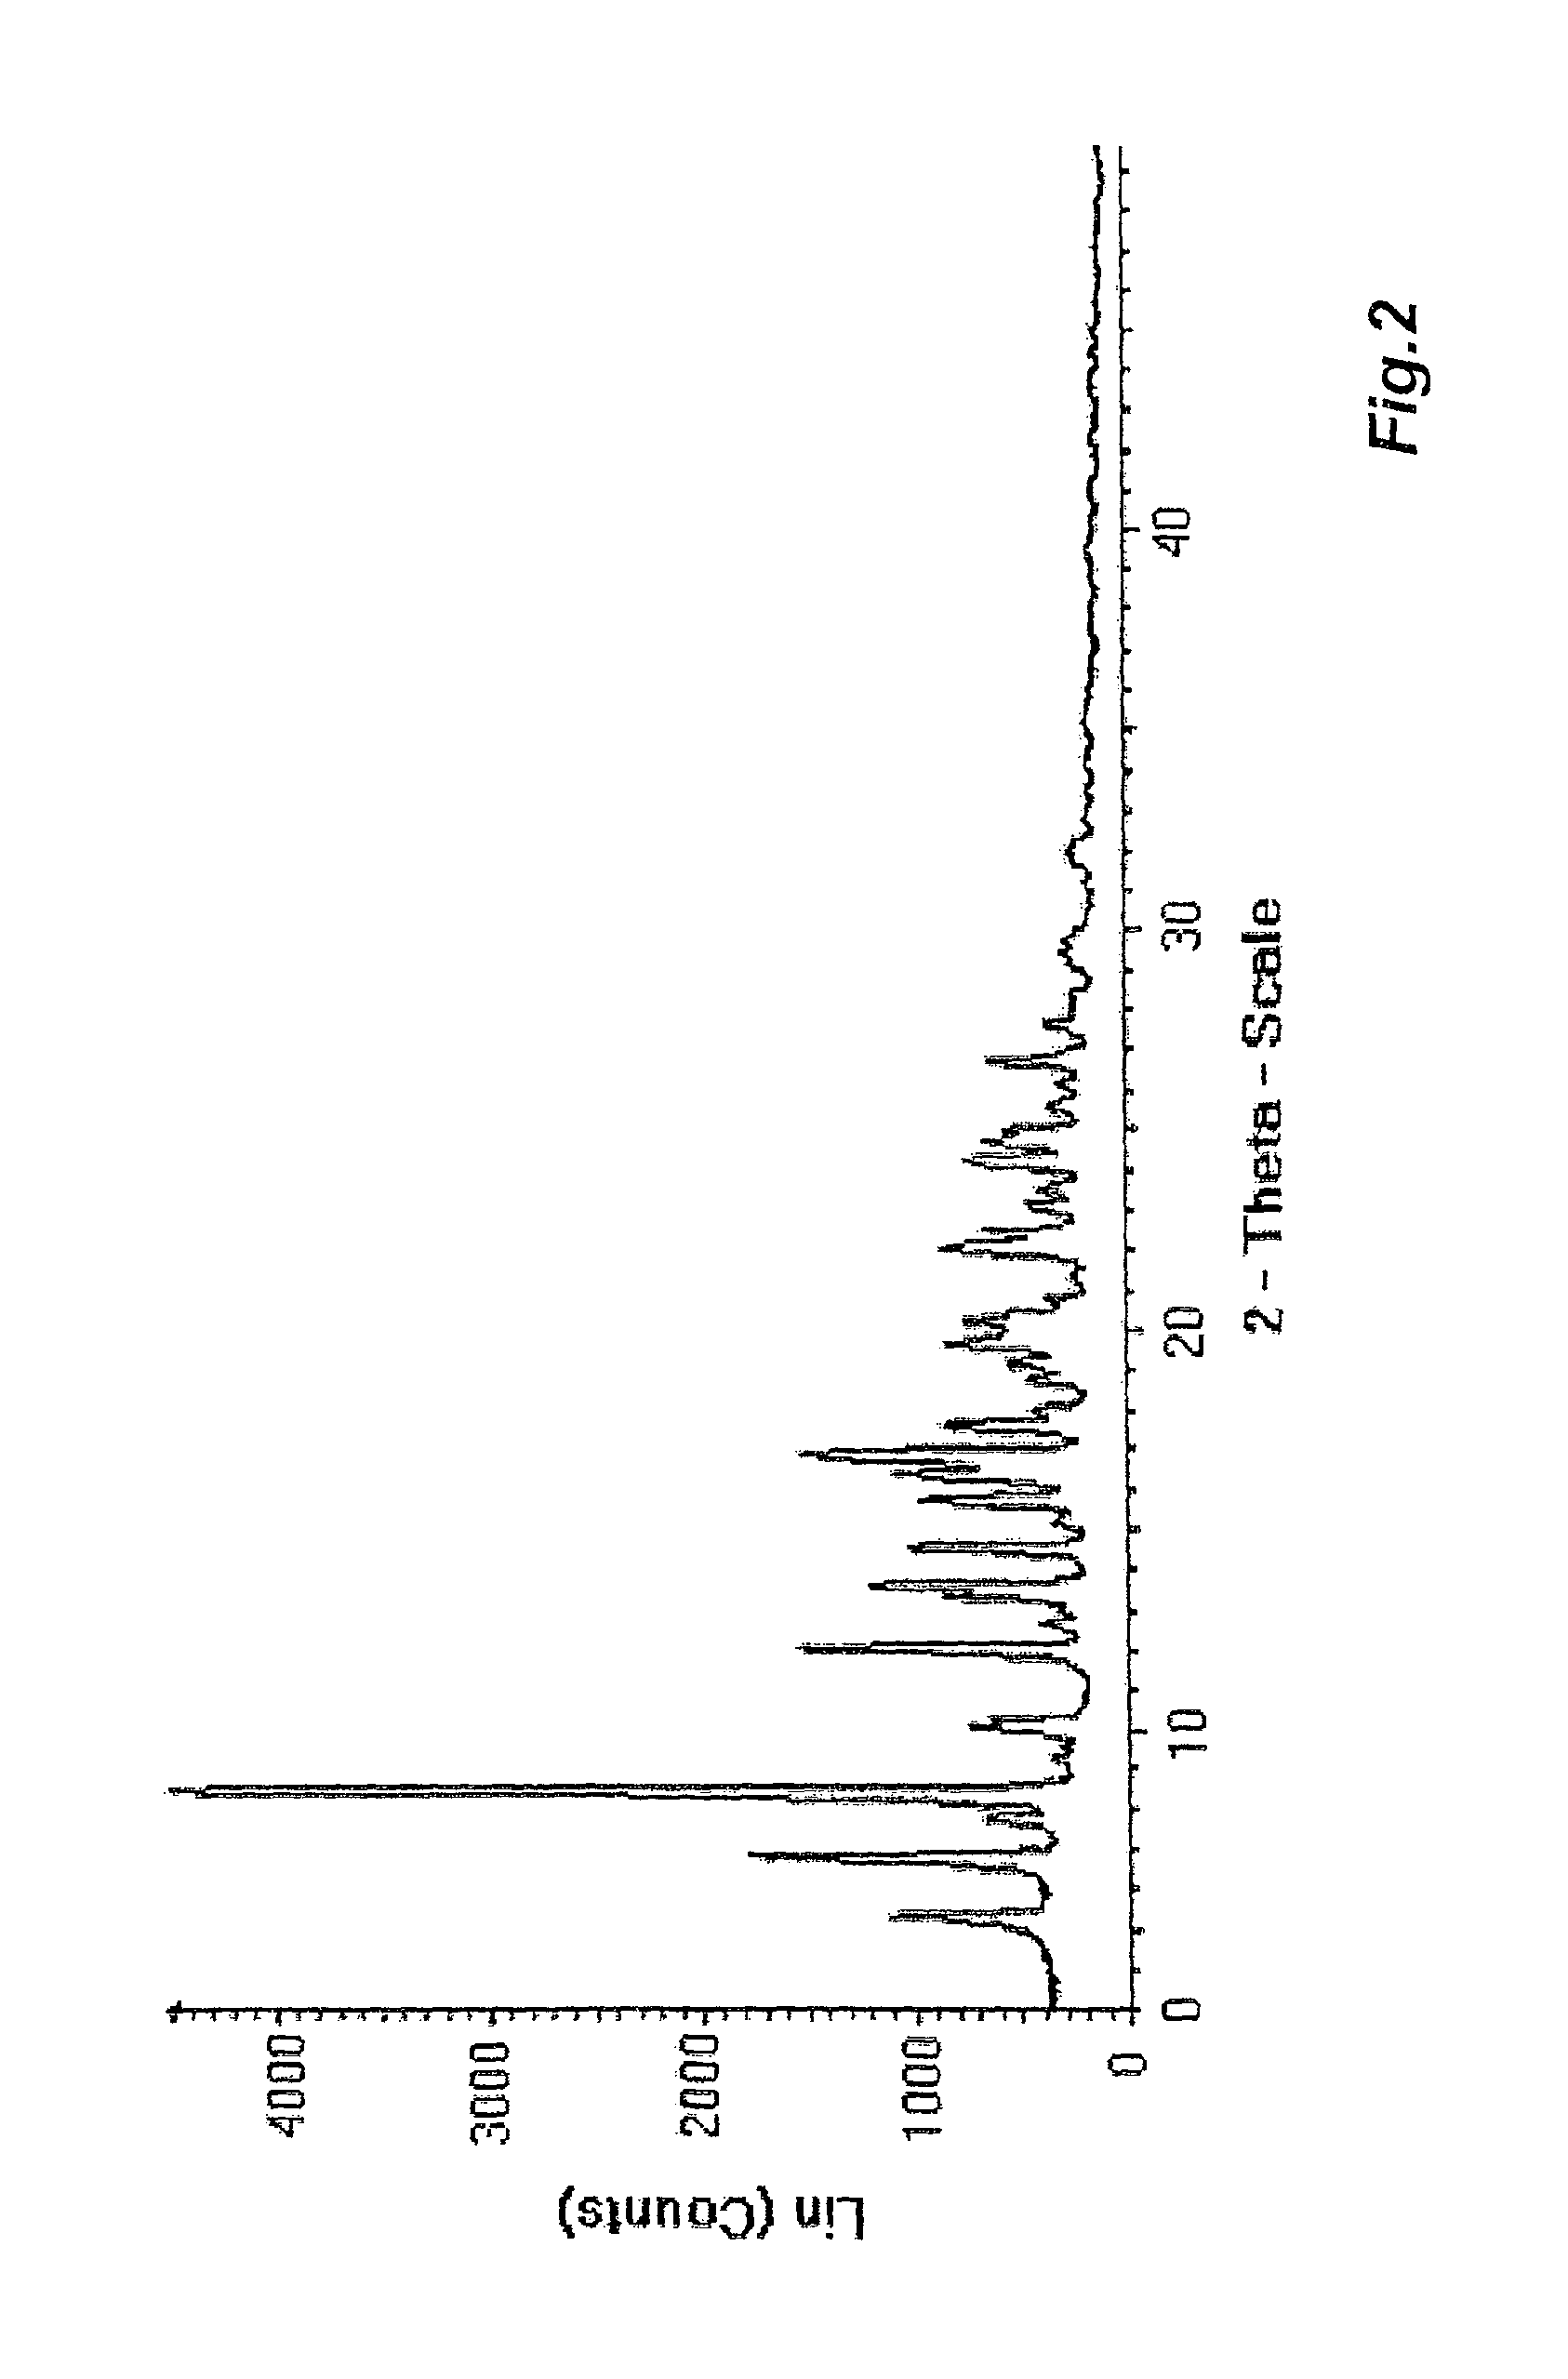 Polymorph of rifaximin and process for the preparation thereof